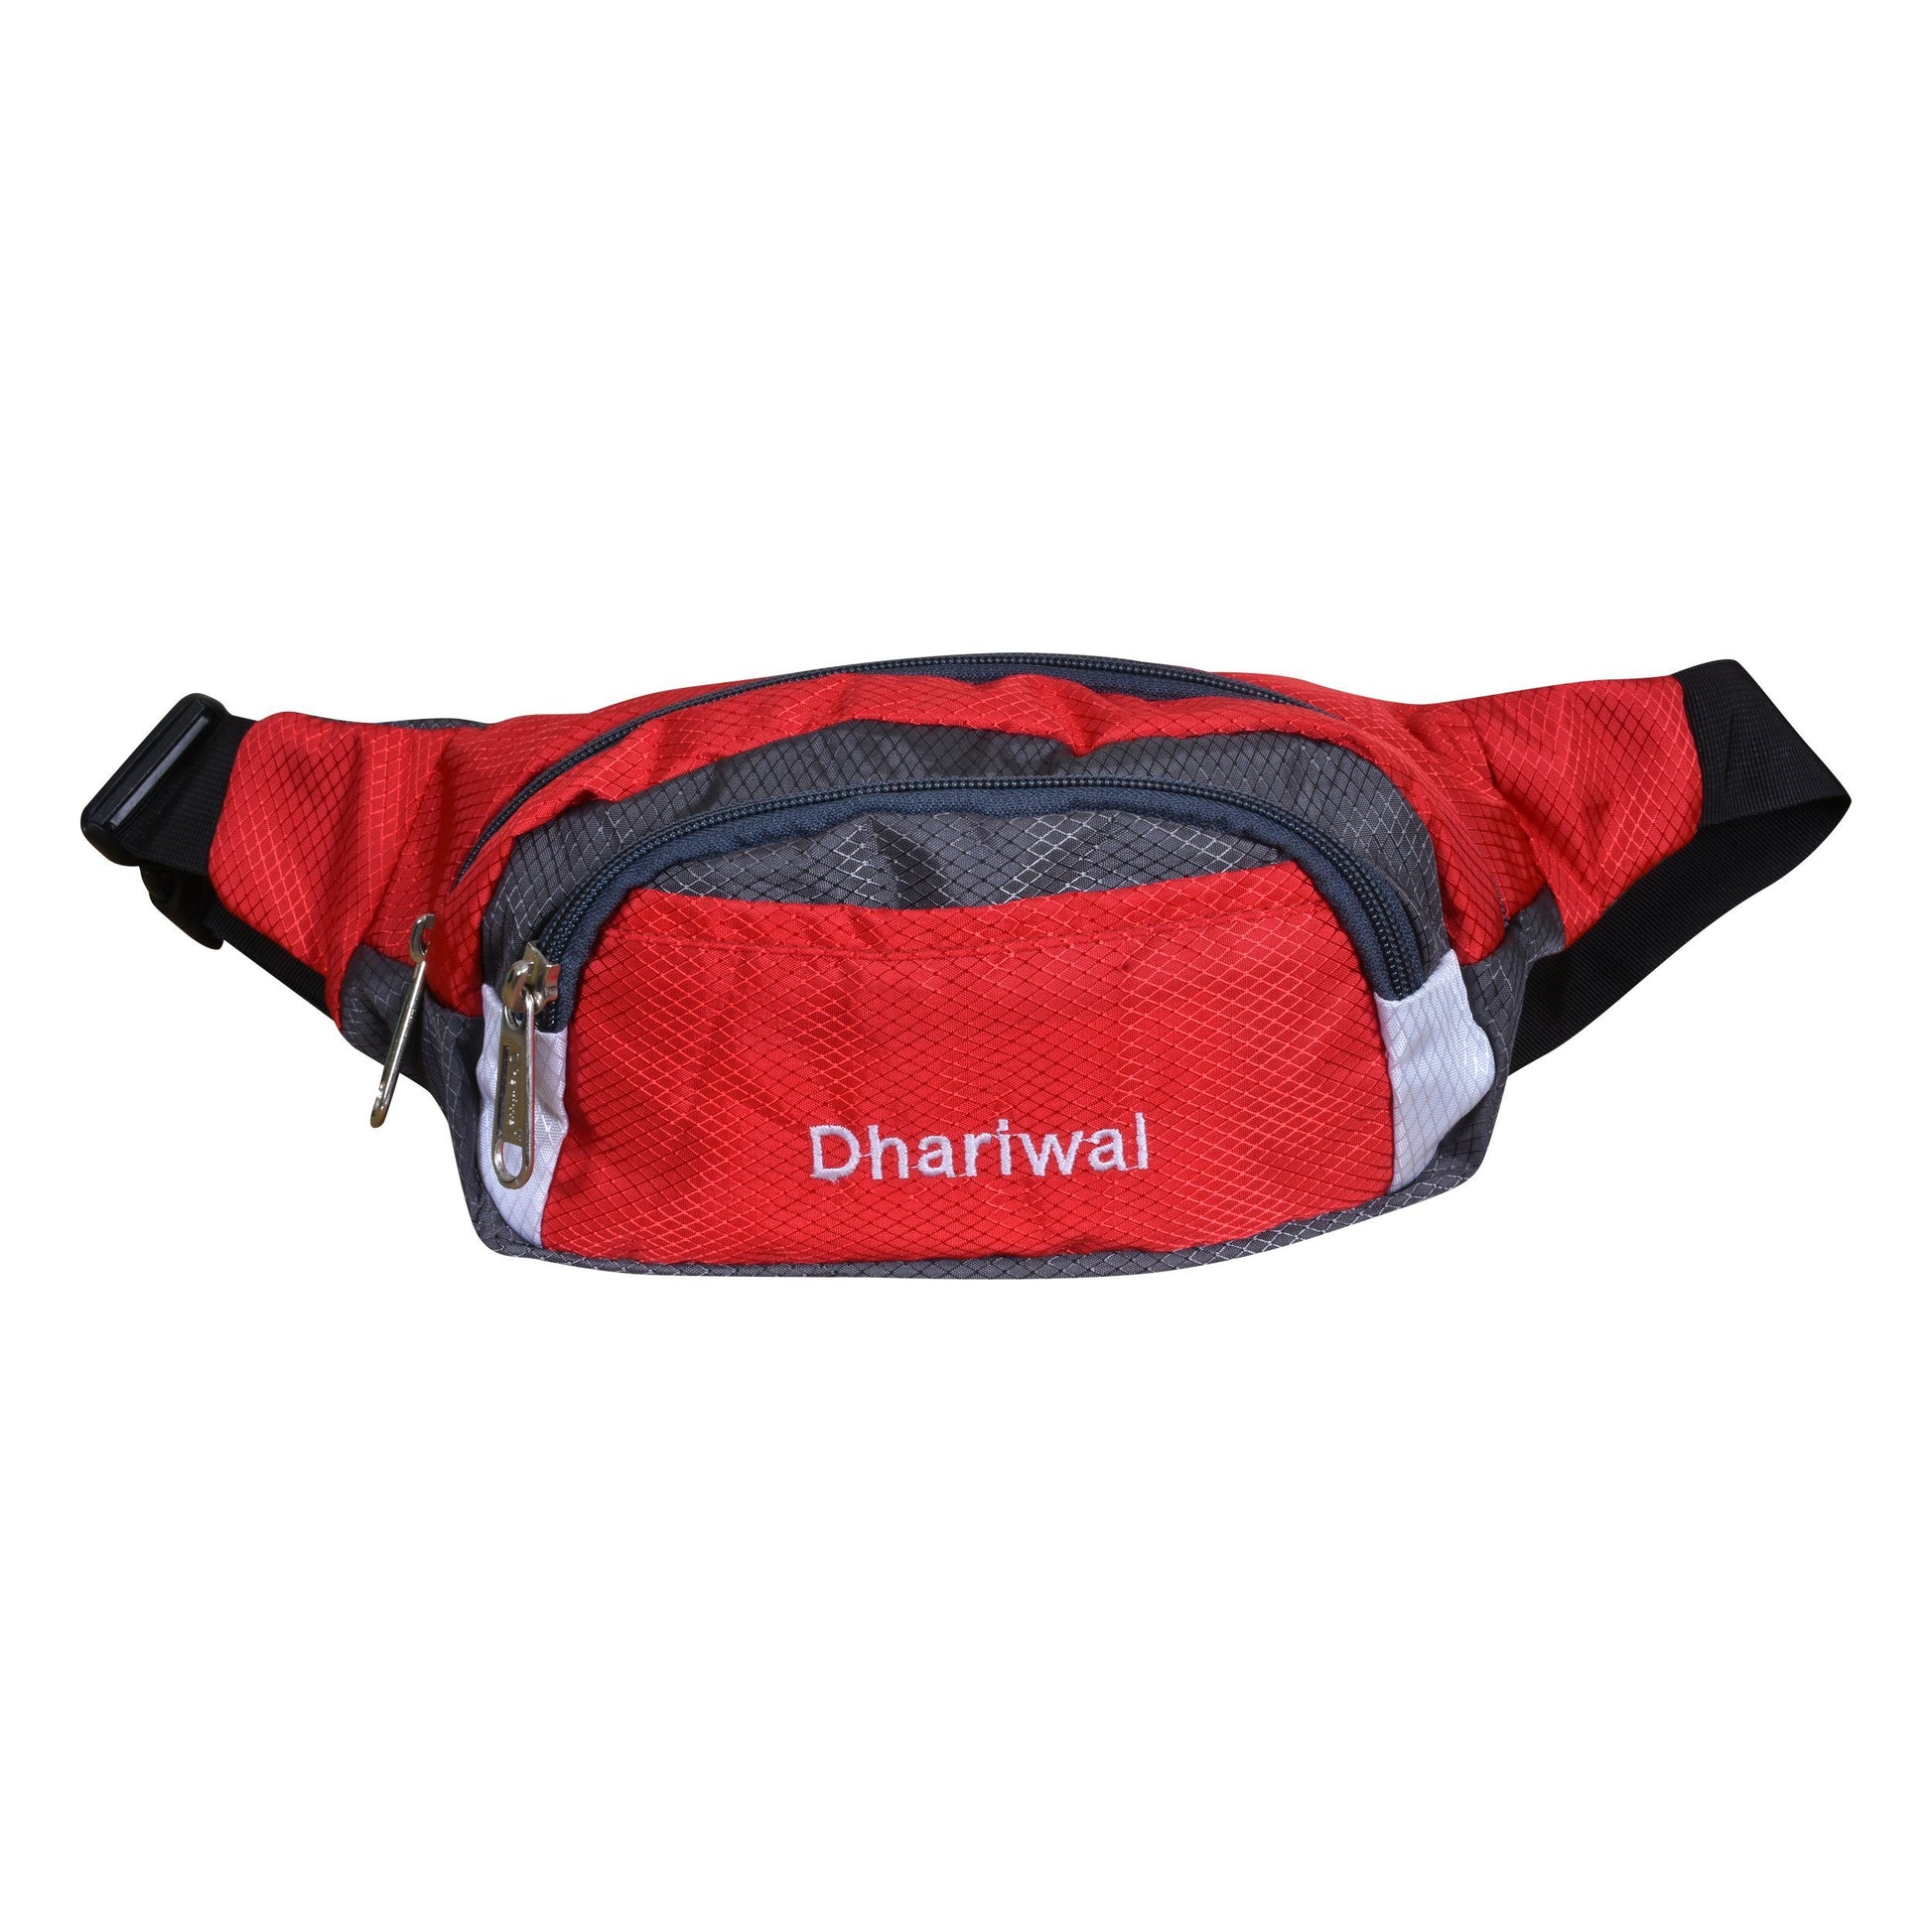 Dhariwal Waist Pack Travel Handy Hiking Zip Pouch Document Money Phone Belt Sport Bag Bum Bag for Men and Women Polyester WP-1201 Waist Pouch Dhariwal Red 